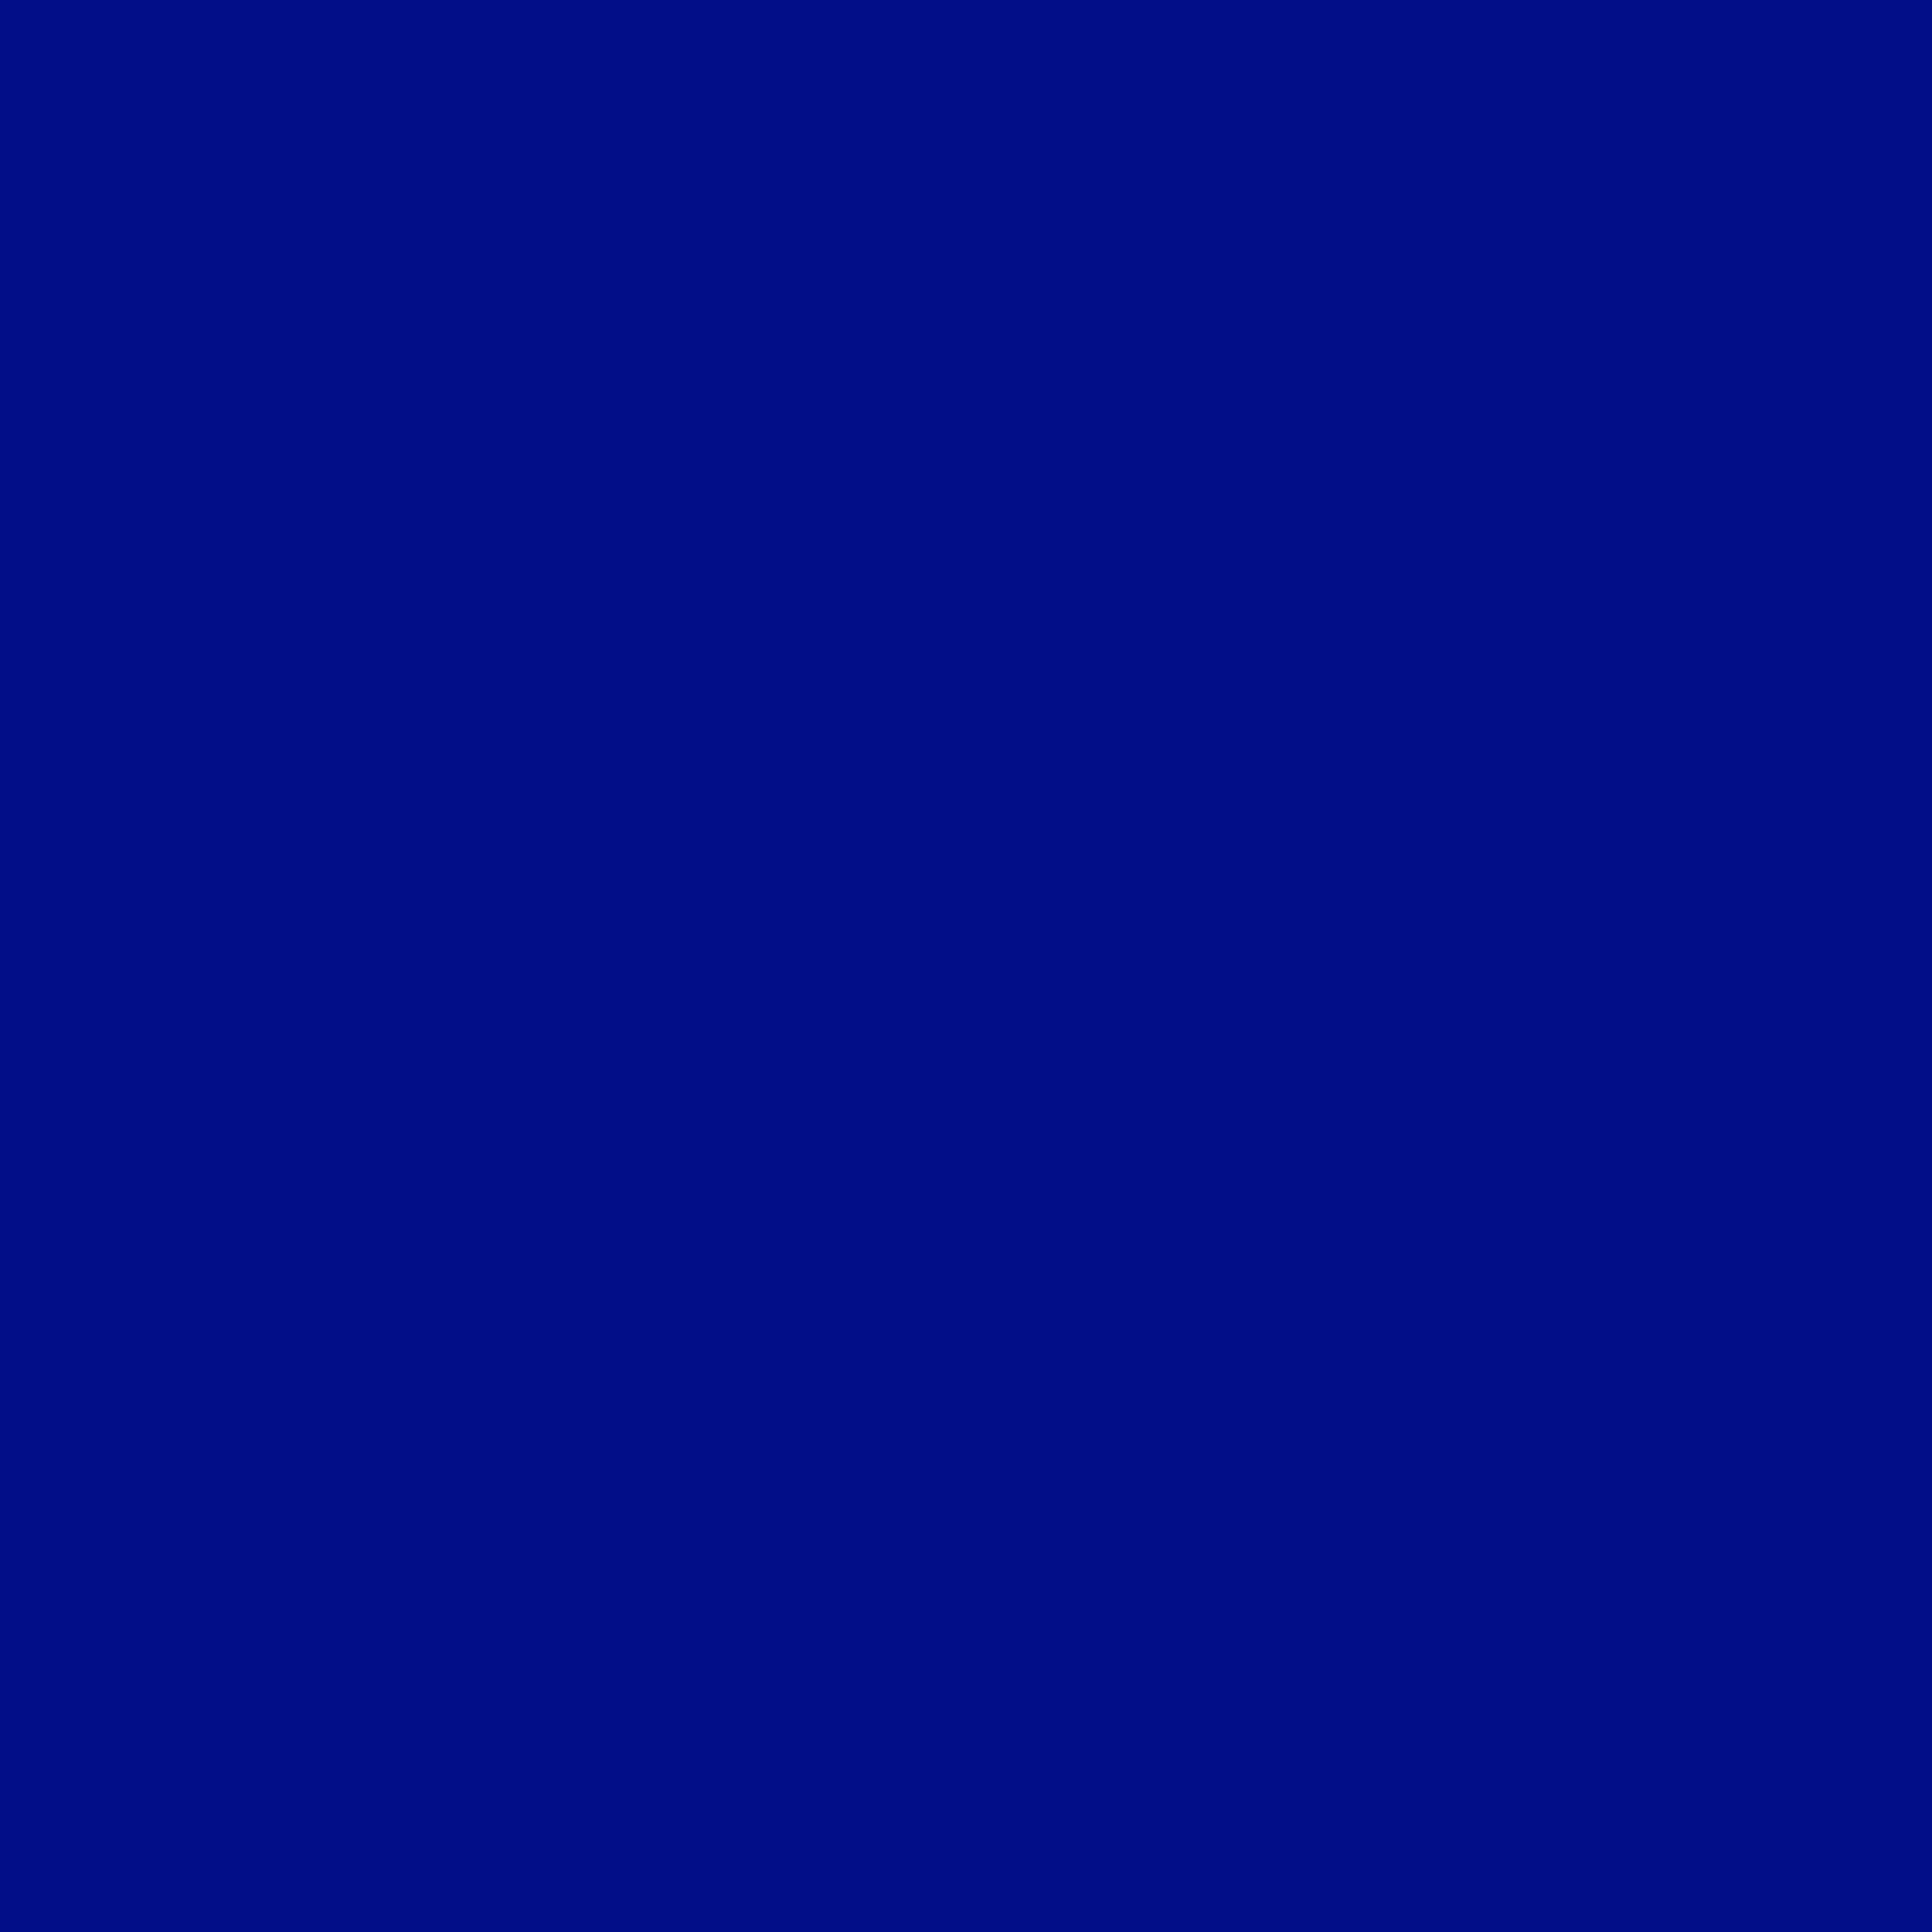 3600x3600 Phthalo Blue Solid Color Background